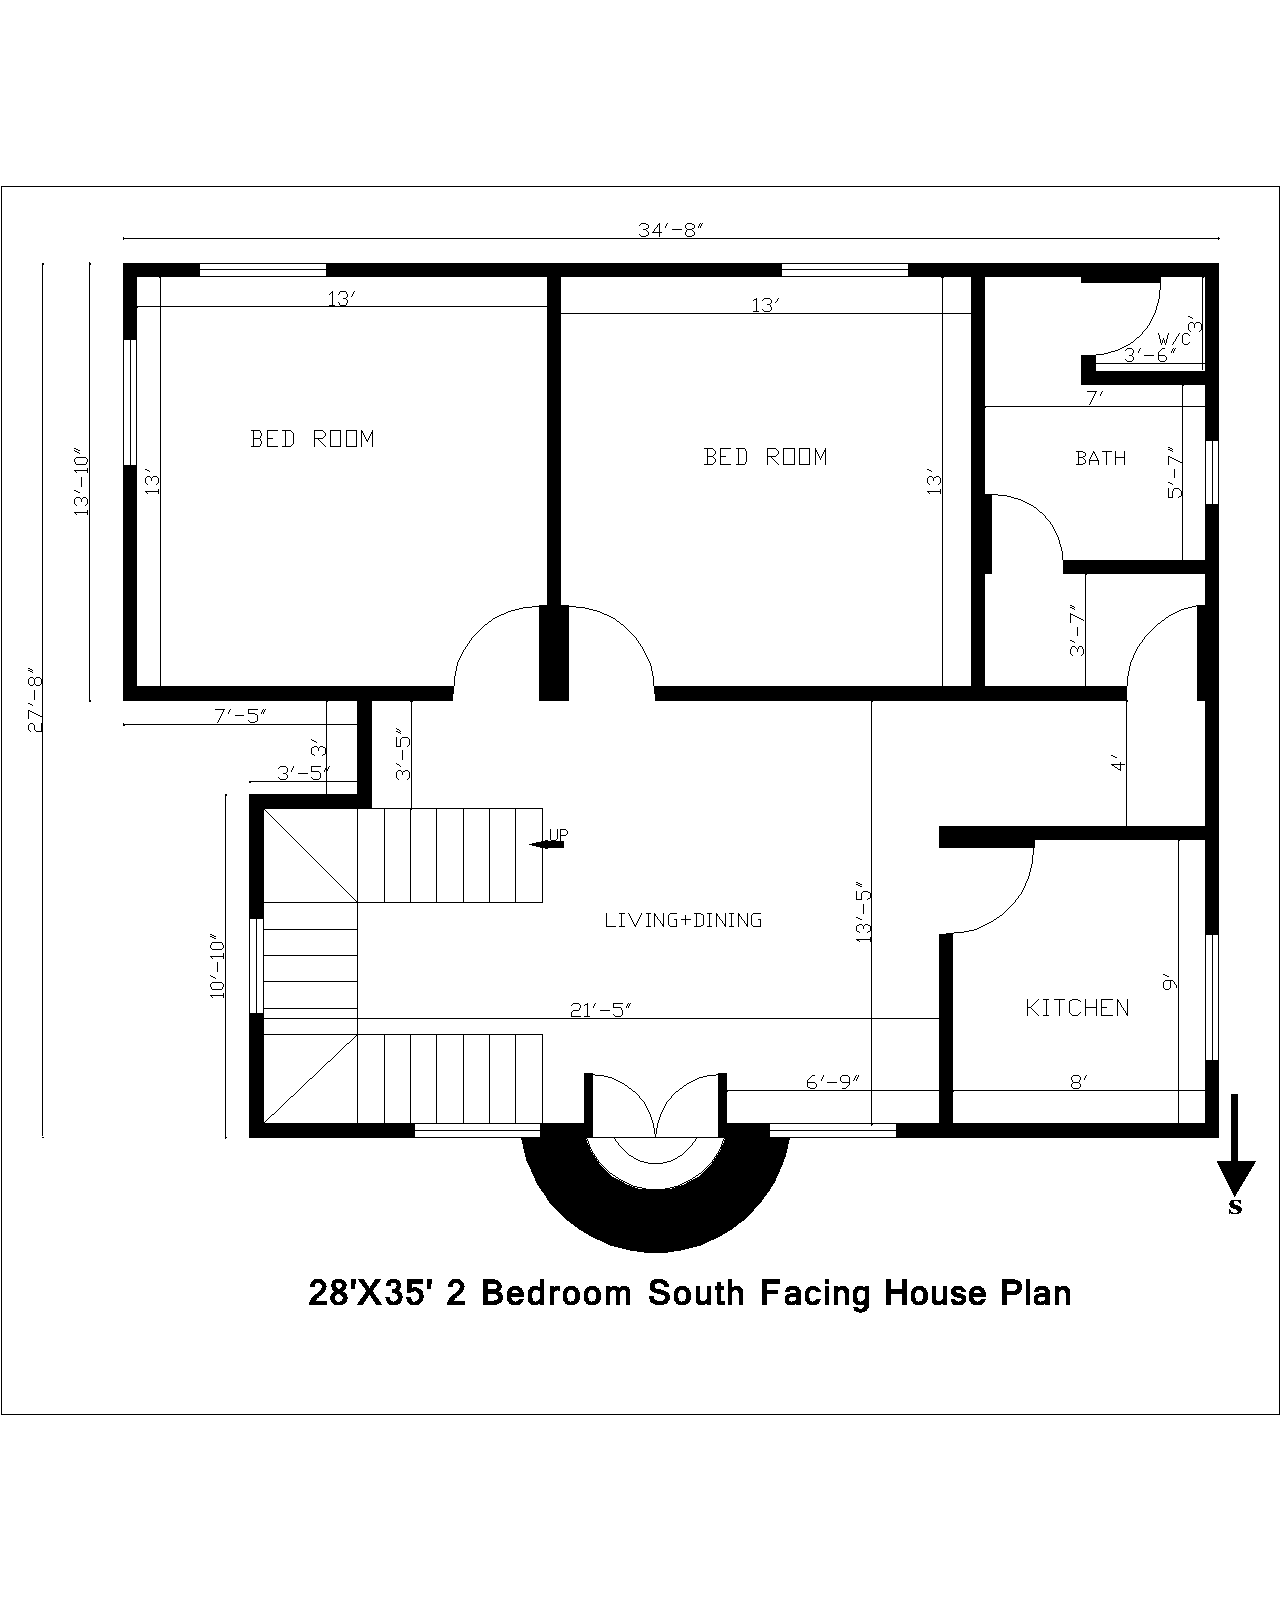 28'X35' 2 Bedroom South Facing House Plan